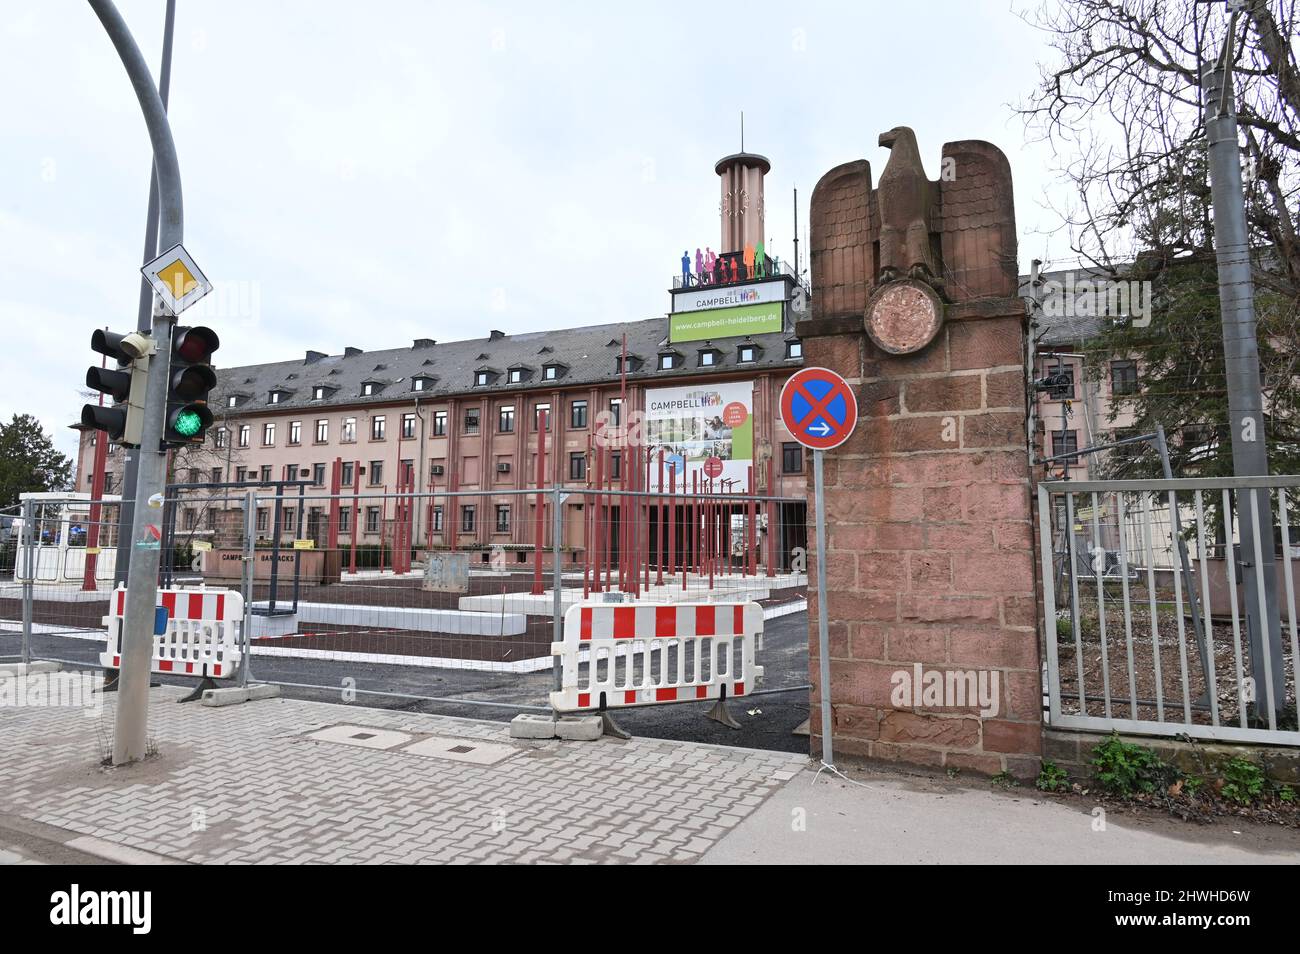 Relics of Nazi architecture at a former barracks in Heidelberg Stock Photo